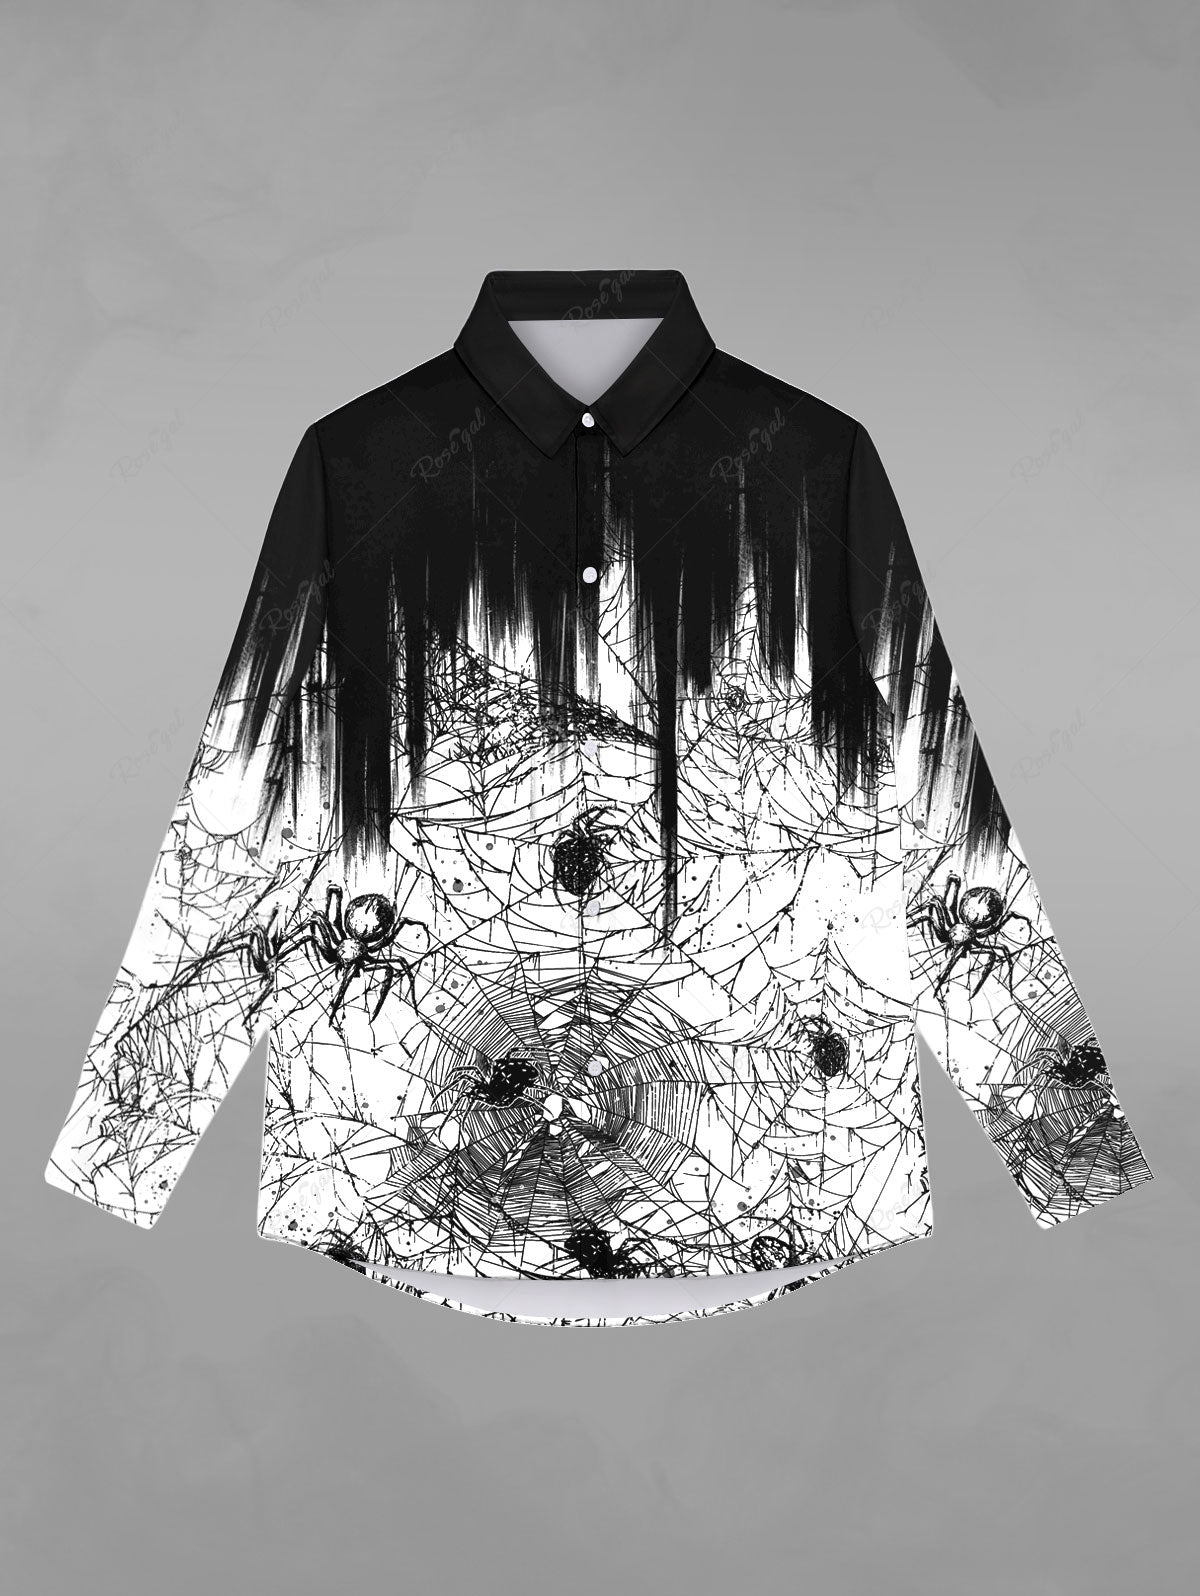 Gothic Spiders and Spider-web Light Beam Print Halloween Shirt For Men